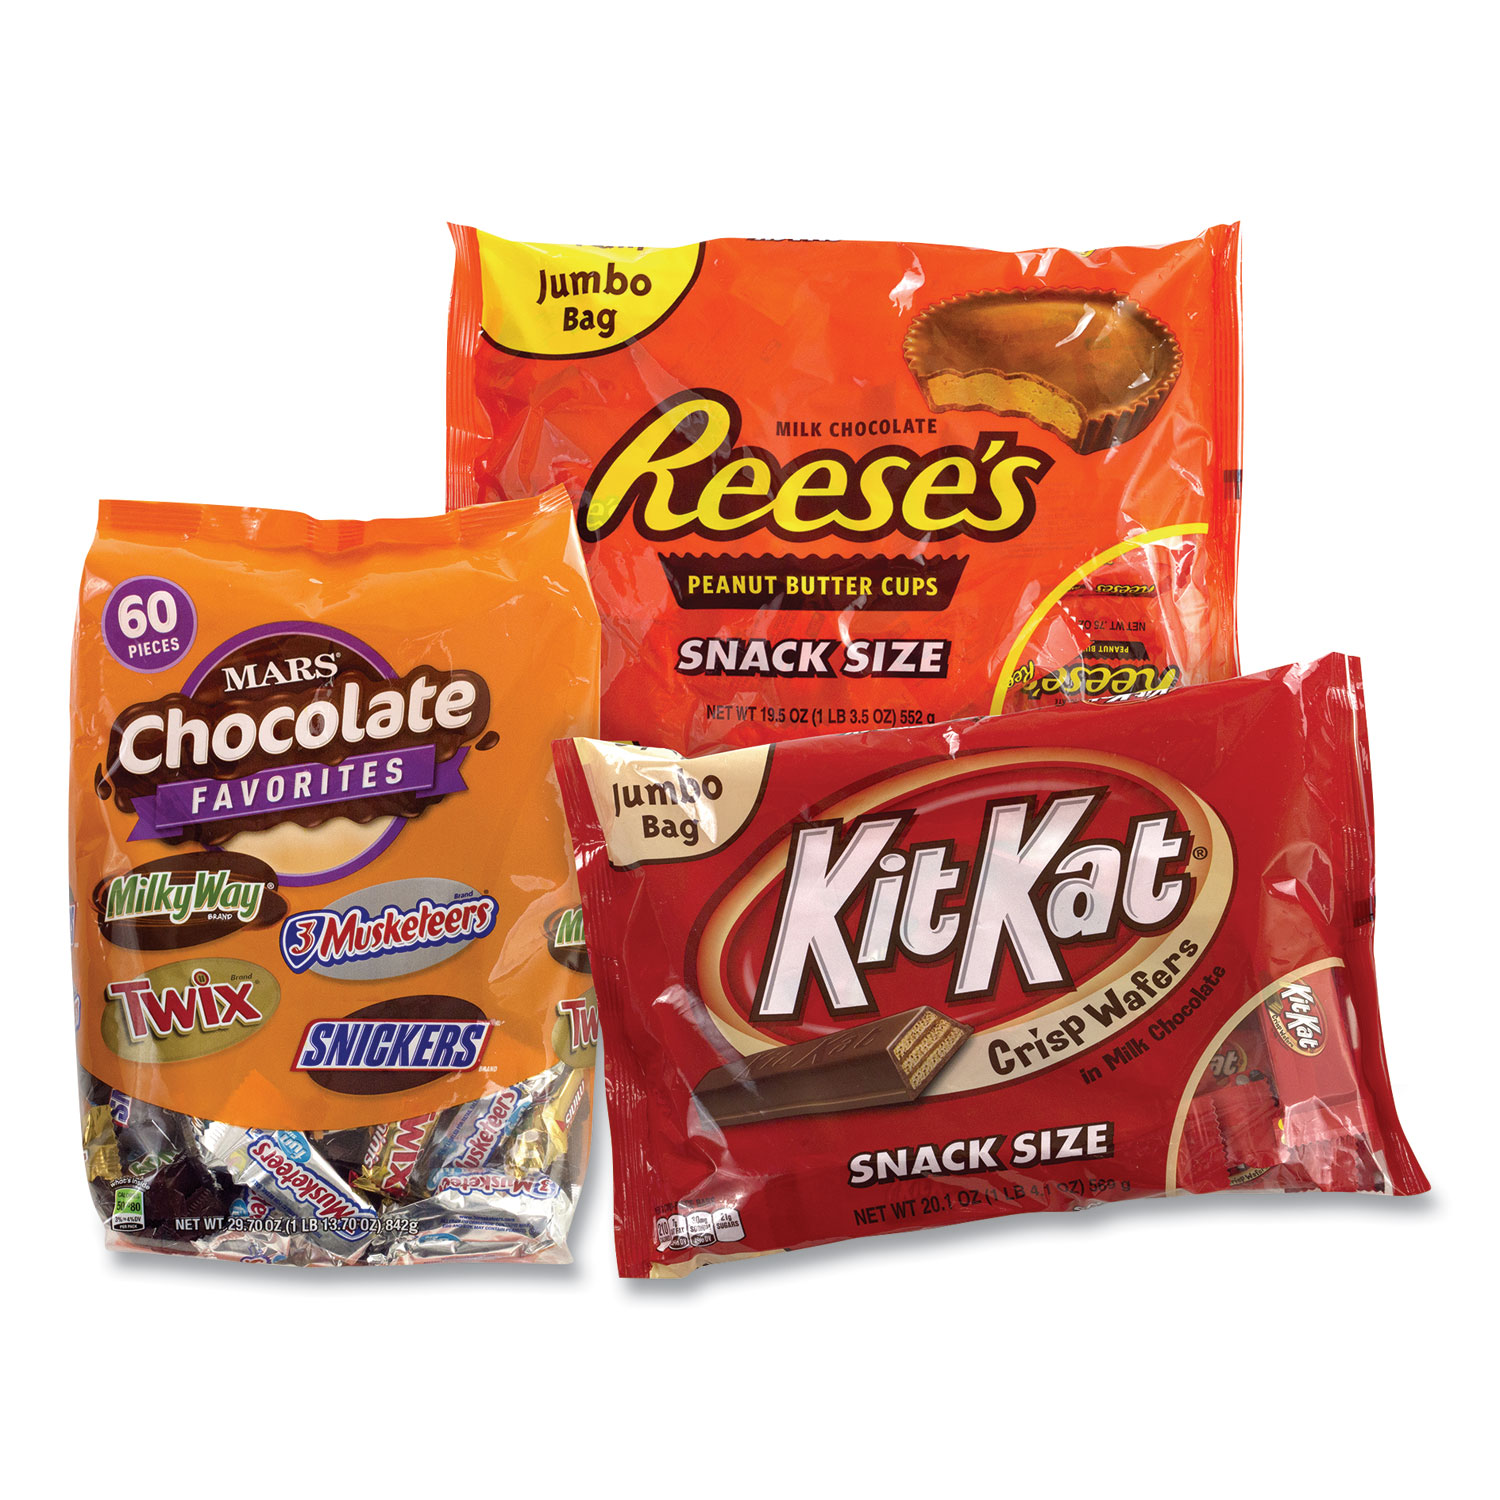 National Brand Chocolate Party Assortment, Mars Asst/Kit Kat/Reeses Peanut Butter Cups, 3 Bag Bundle, Free Delivery in 1-4 Business Days